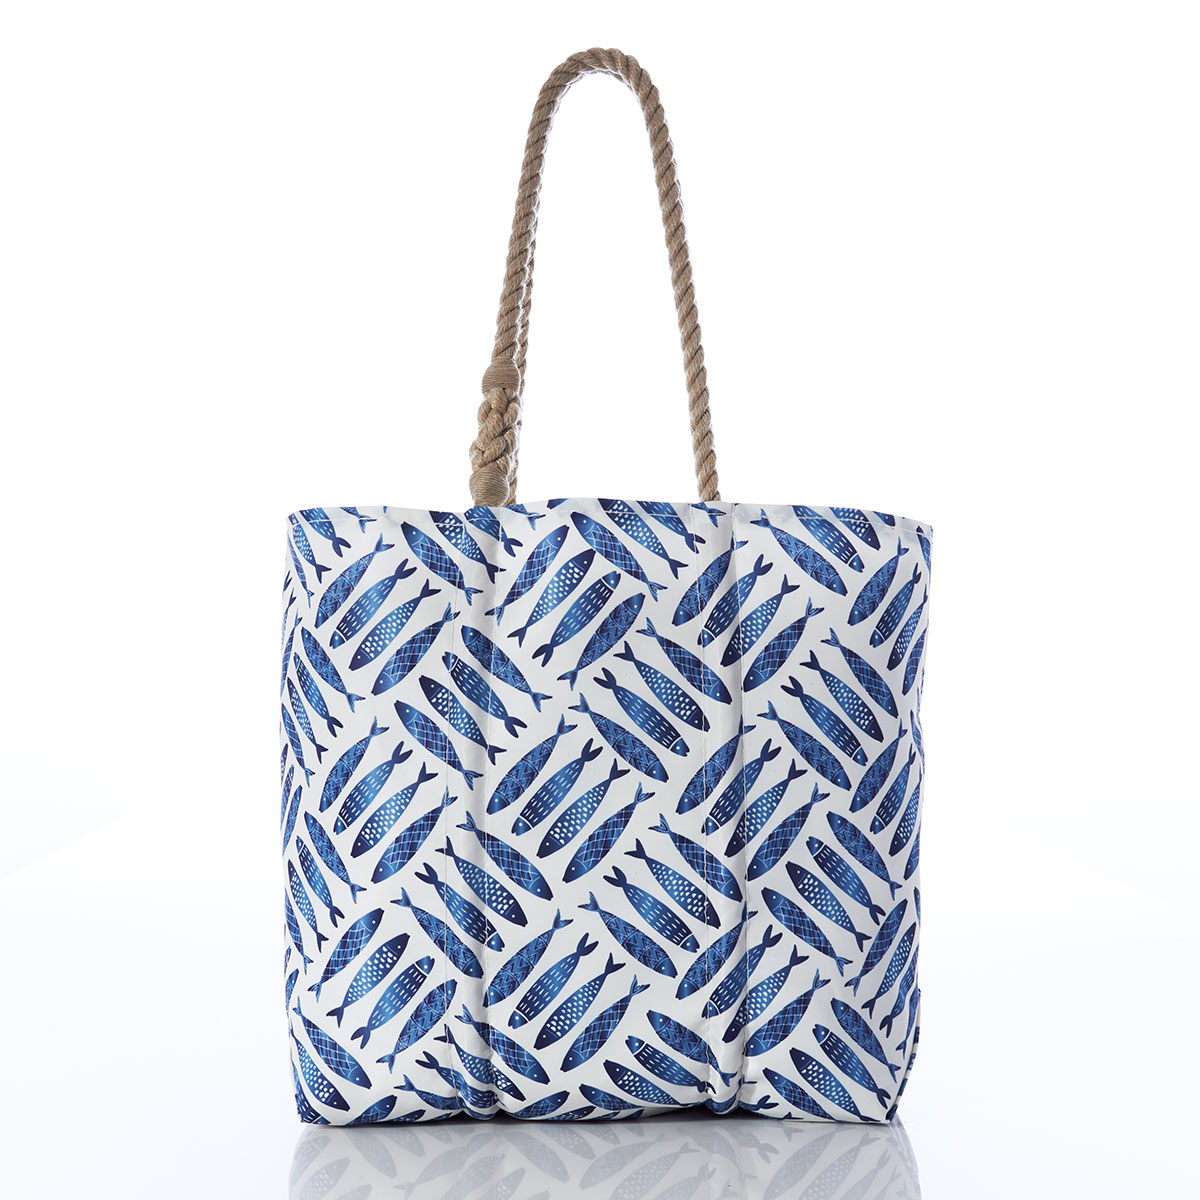 criss cross print of blue school of fish on recycled sail cloth medium tote with hemp rope handles